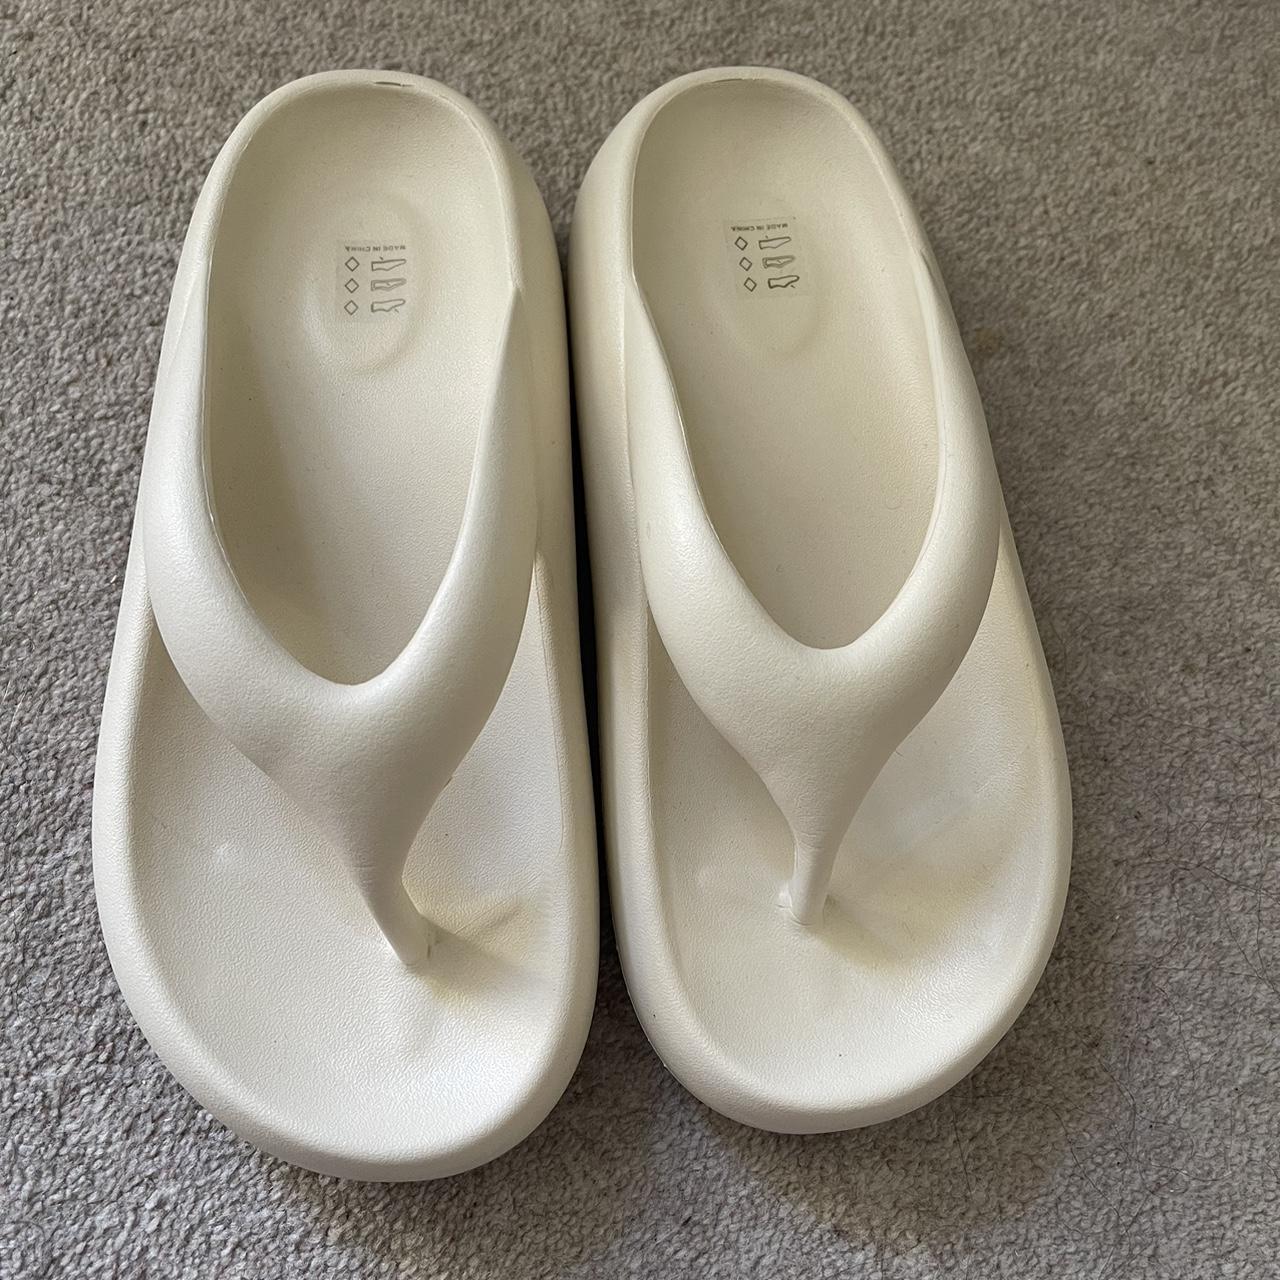 BRAND NEW Truffle Collection moulded flip flops in... - Depop